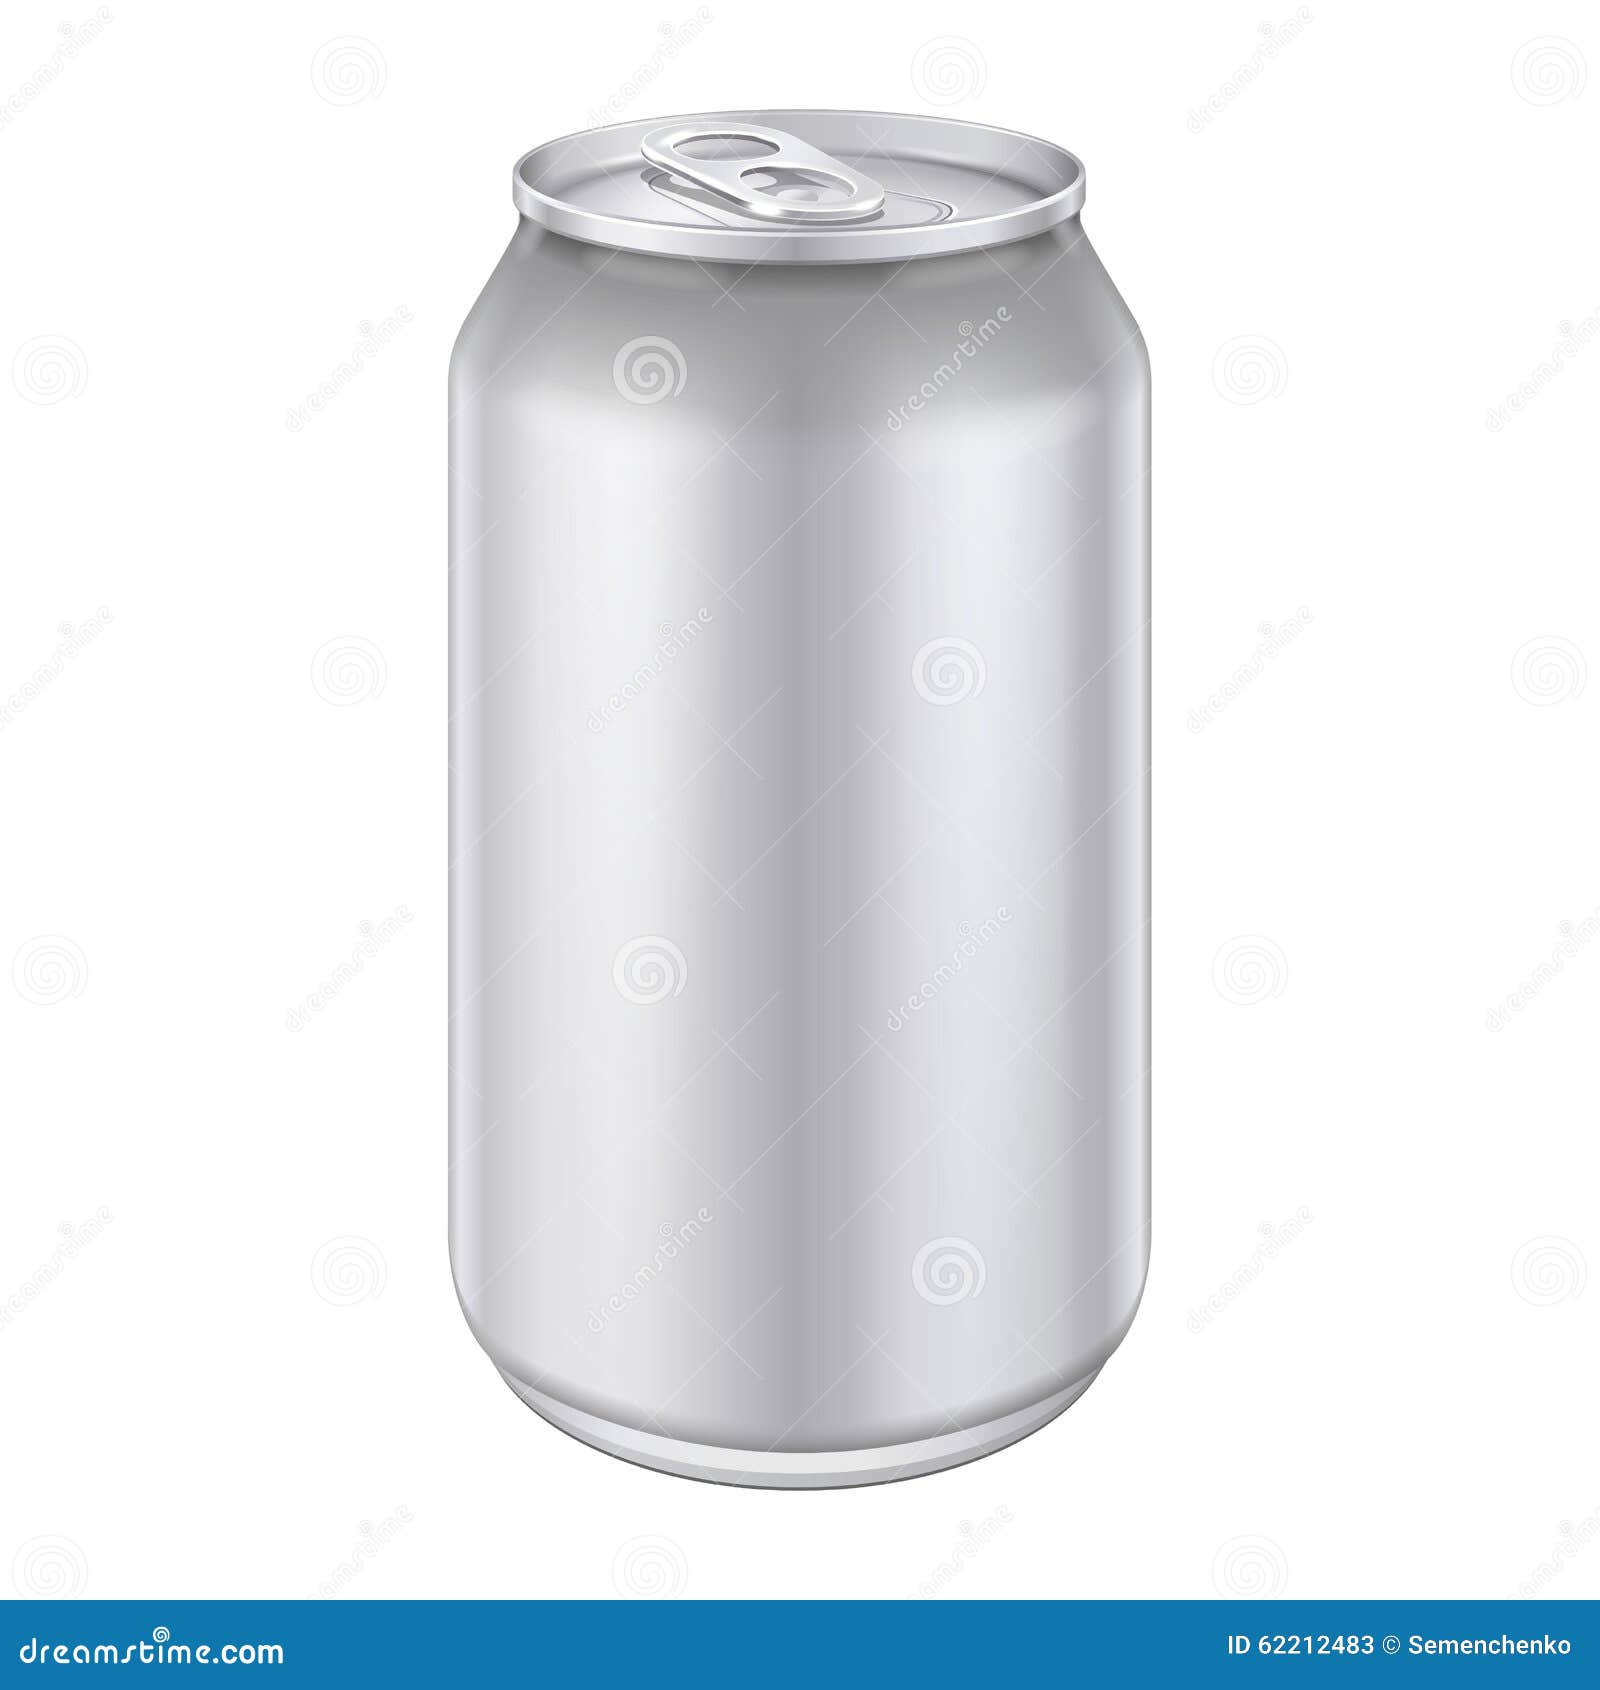 Gray Metal Aluminum Beverage Drink Can 500ml. Ready for Your Design ...